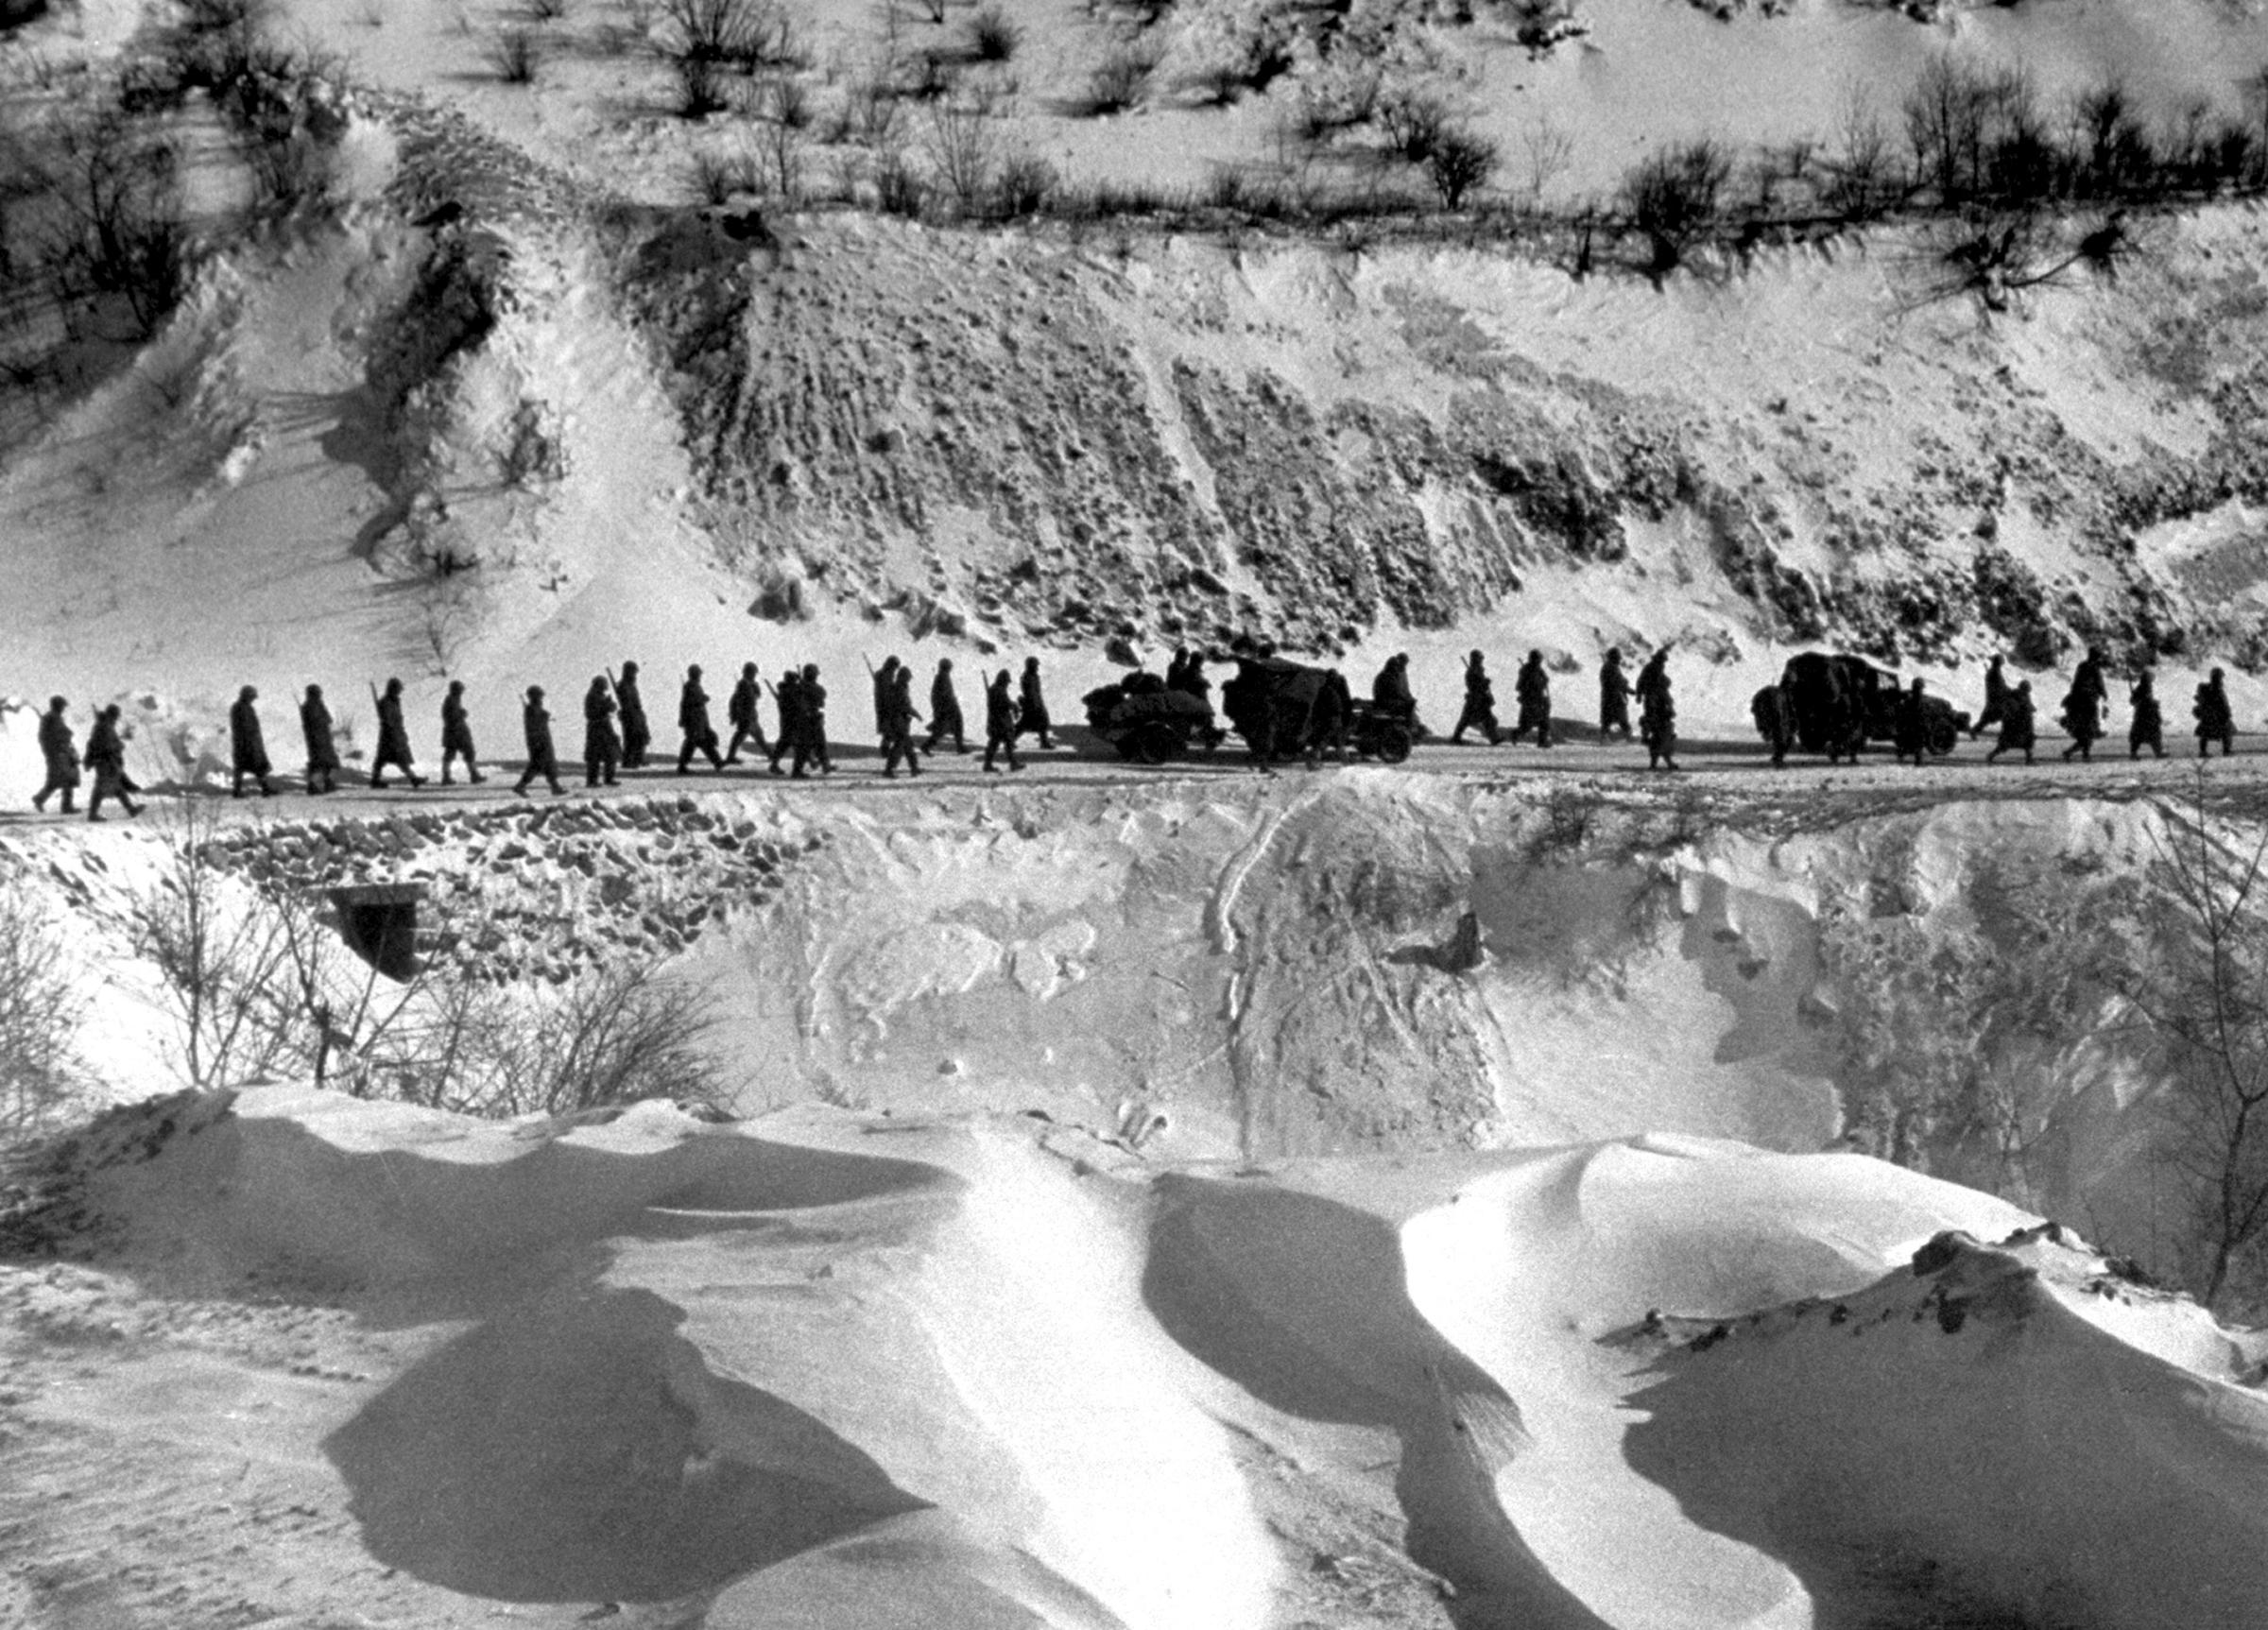 A column of American Marines marches down a canyon road dubbed "Nightmare Alley" during their retreat from Chosin Reservoir, Korea, 1950.